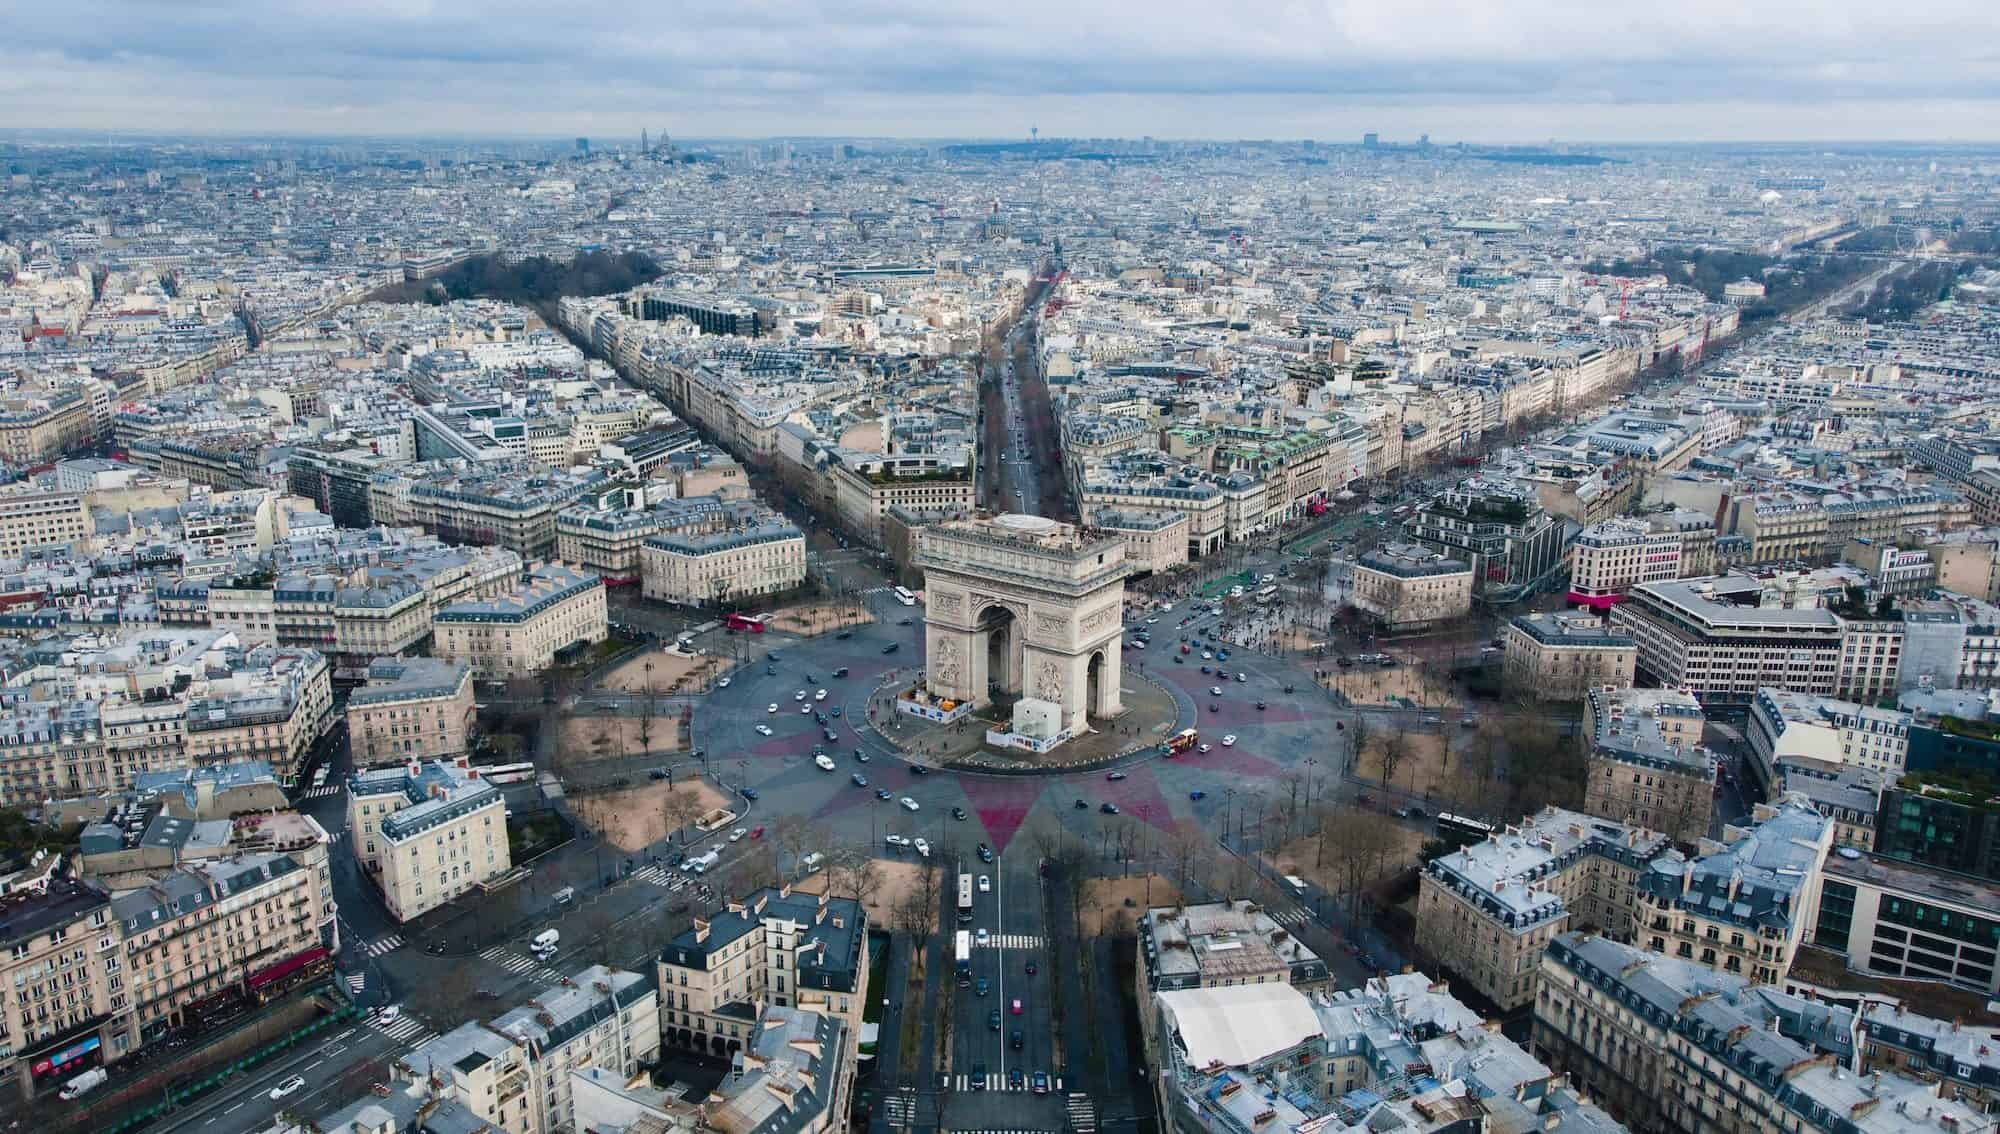 An aerial view of the Arc de Triomphe in Paris, often seen in Netflix movies, which are great for learning French.